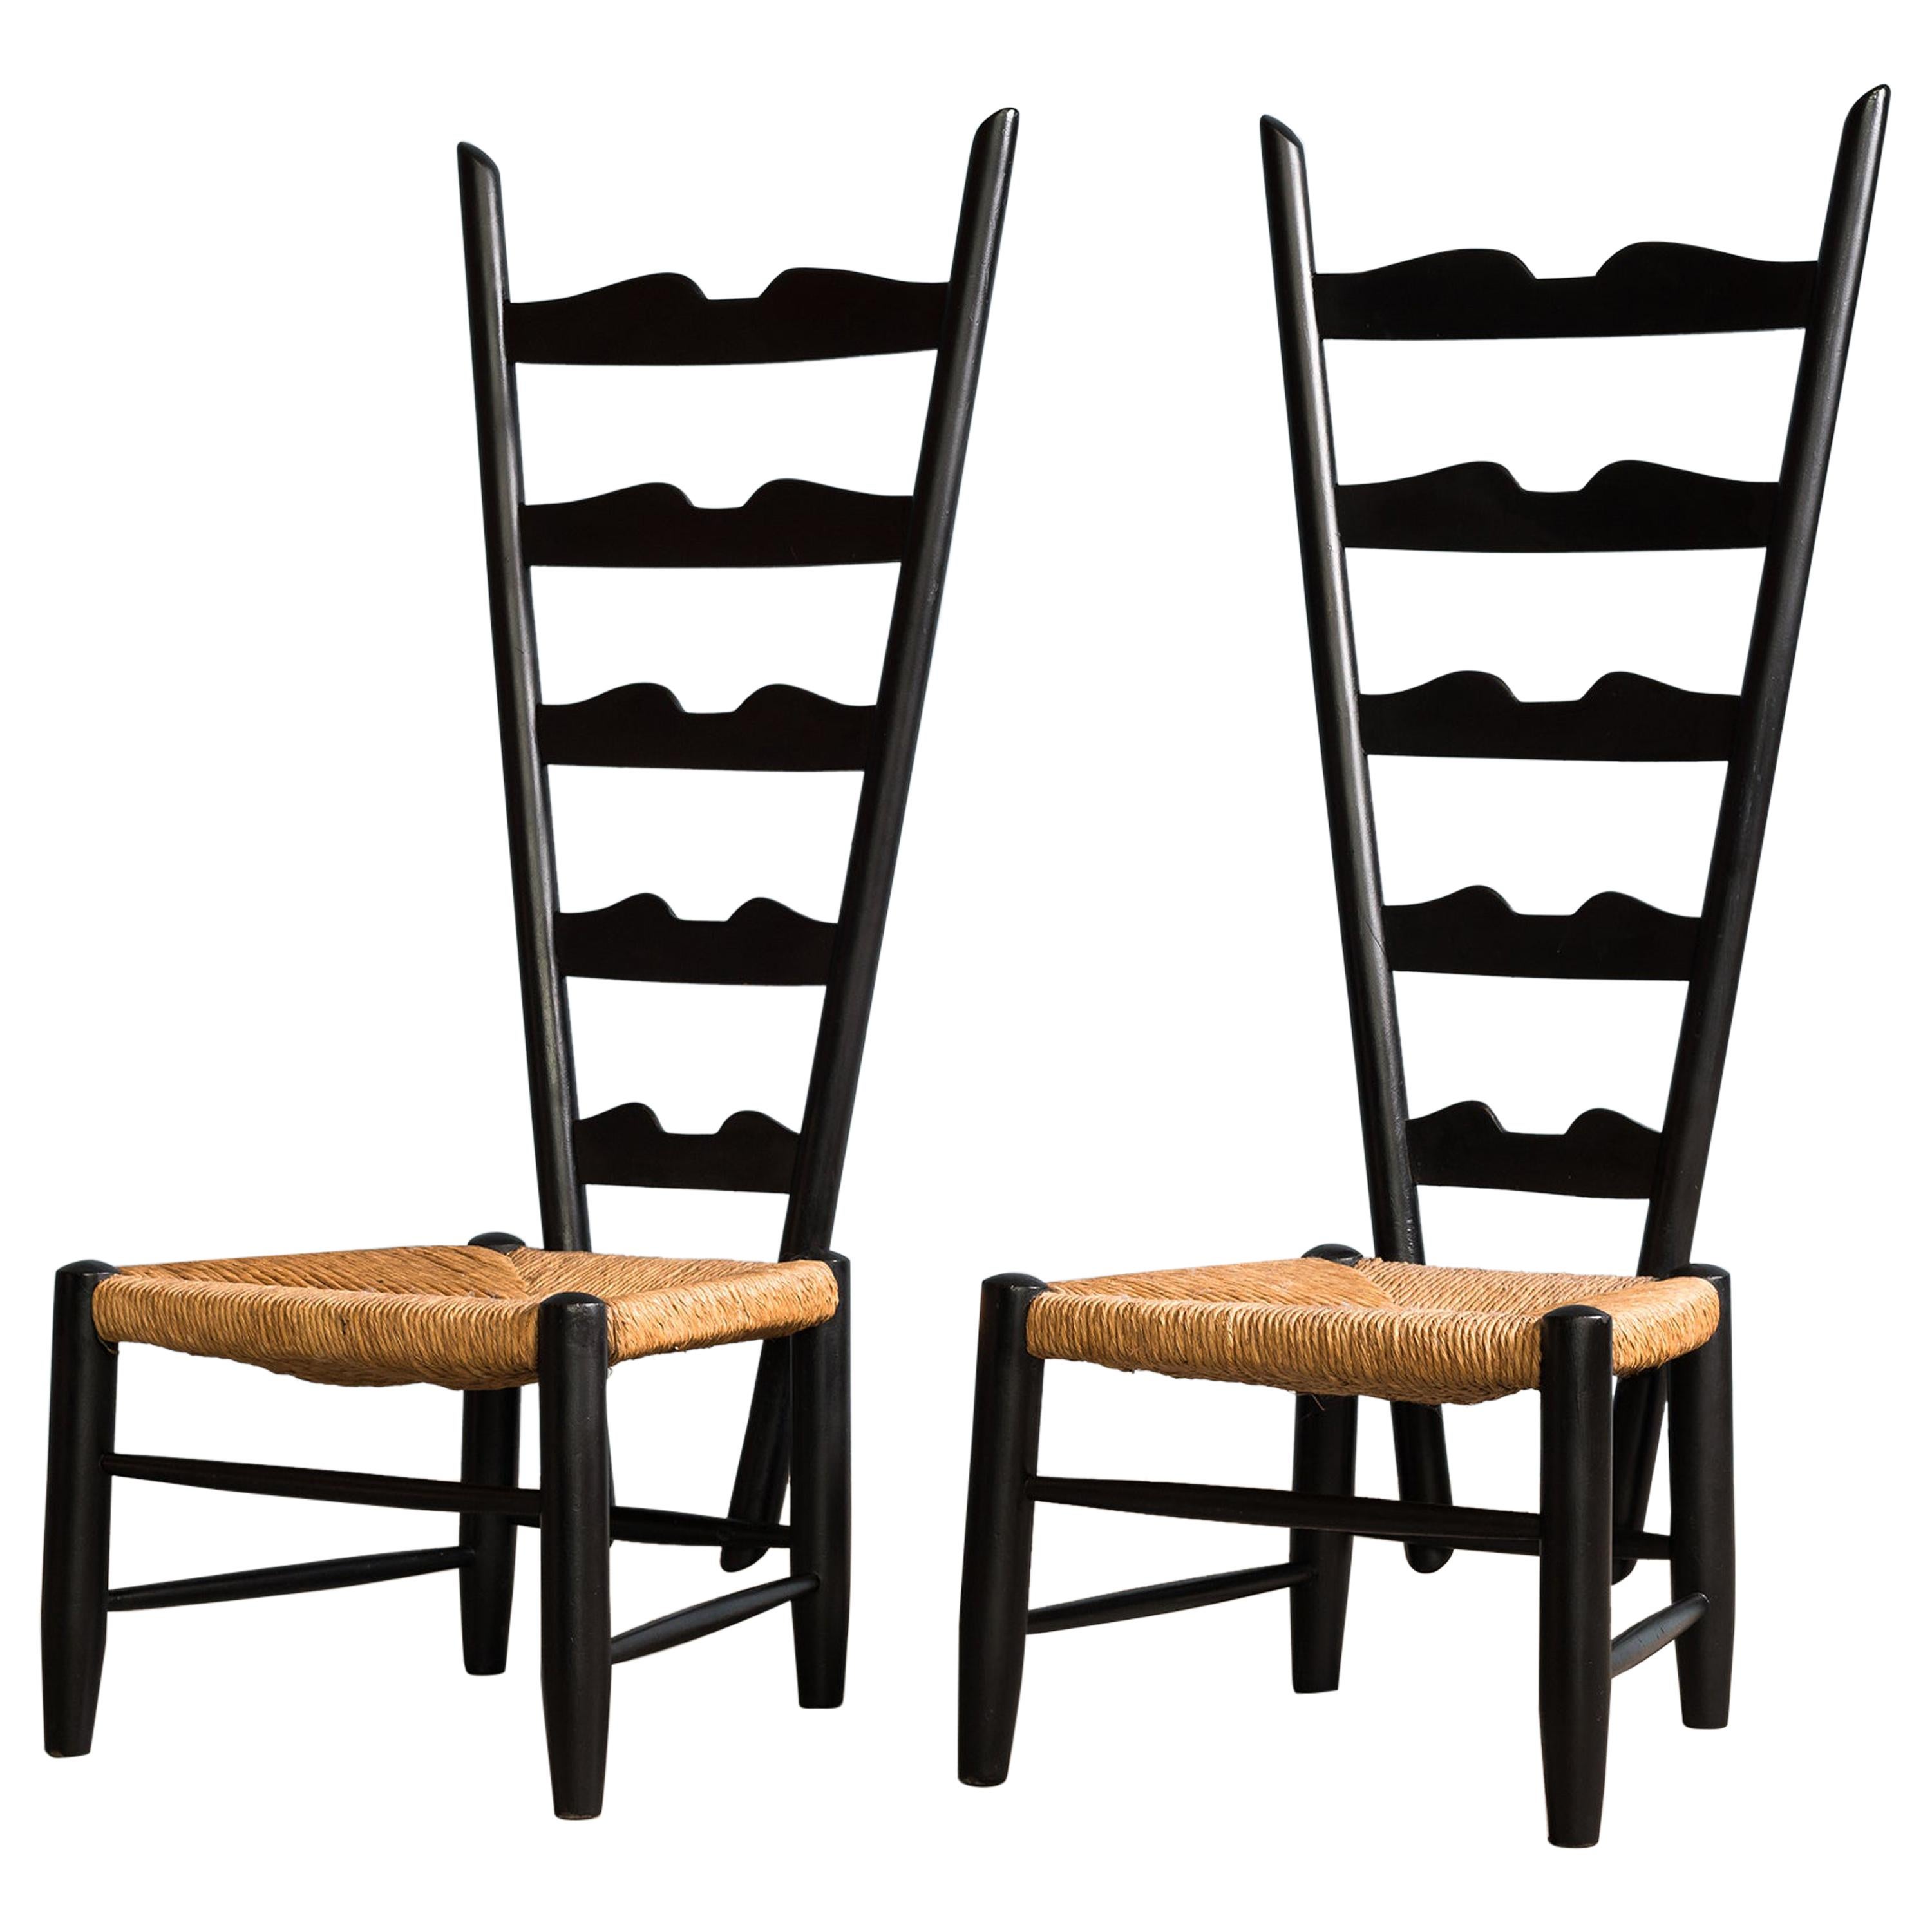 Pair of Fireside Chairs by Gio Ponti, circa 1939